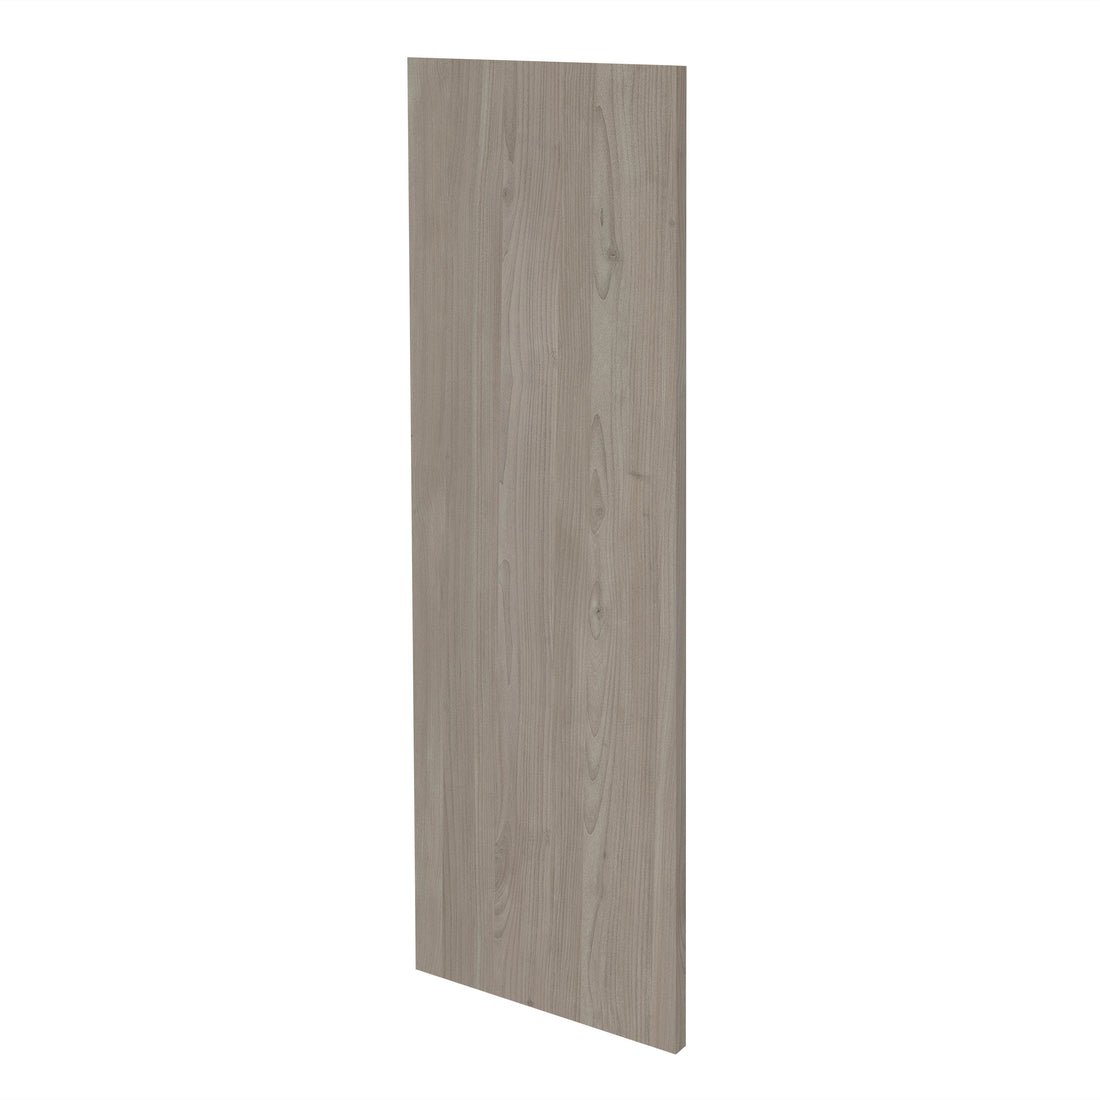 Grey Nordic Slab Style Vanity Cabinet End Panel (36 in W x 0.75 in D x 21 in H)